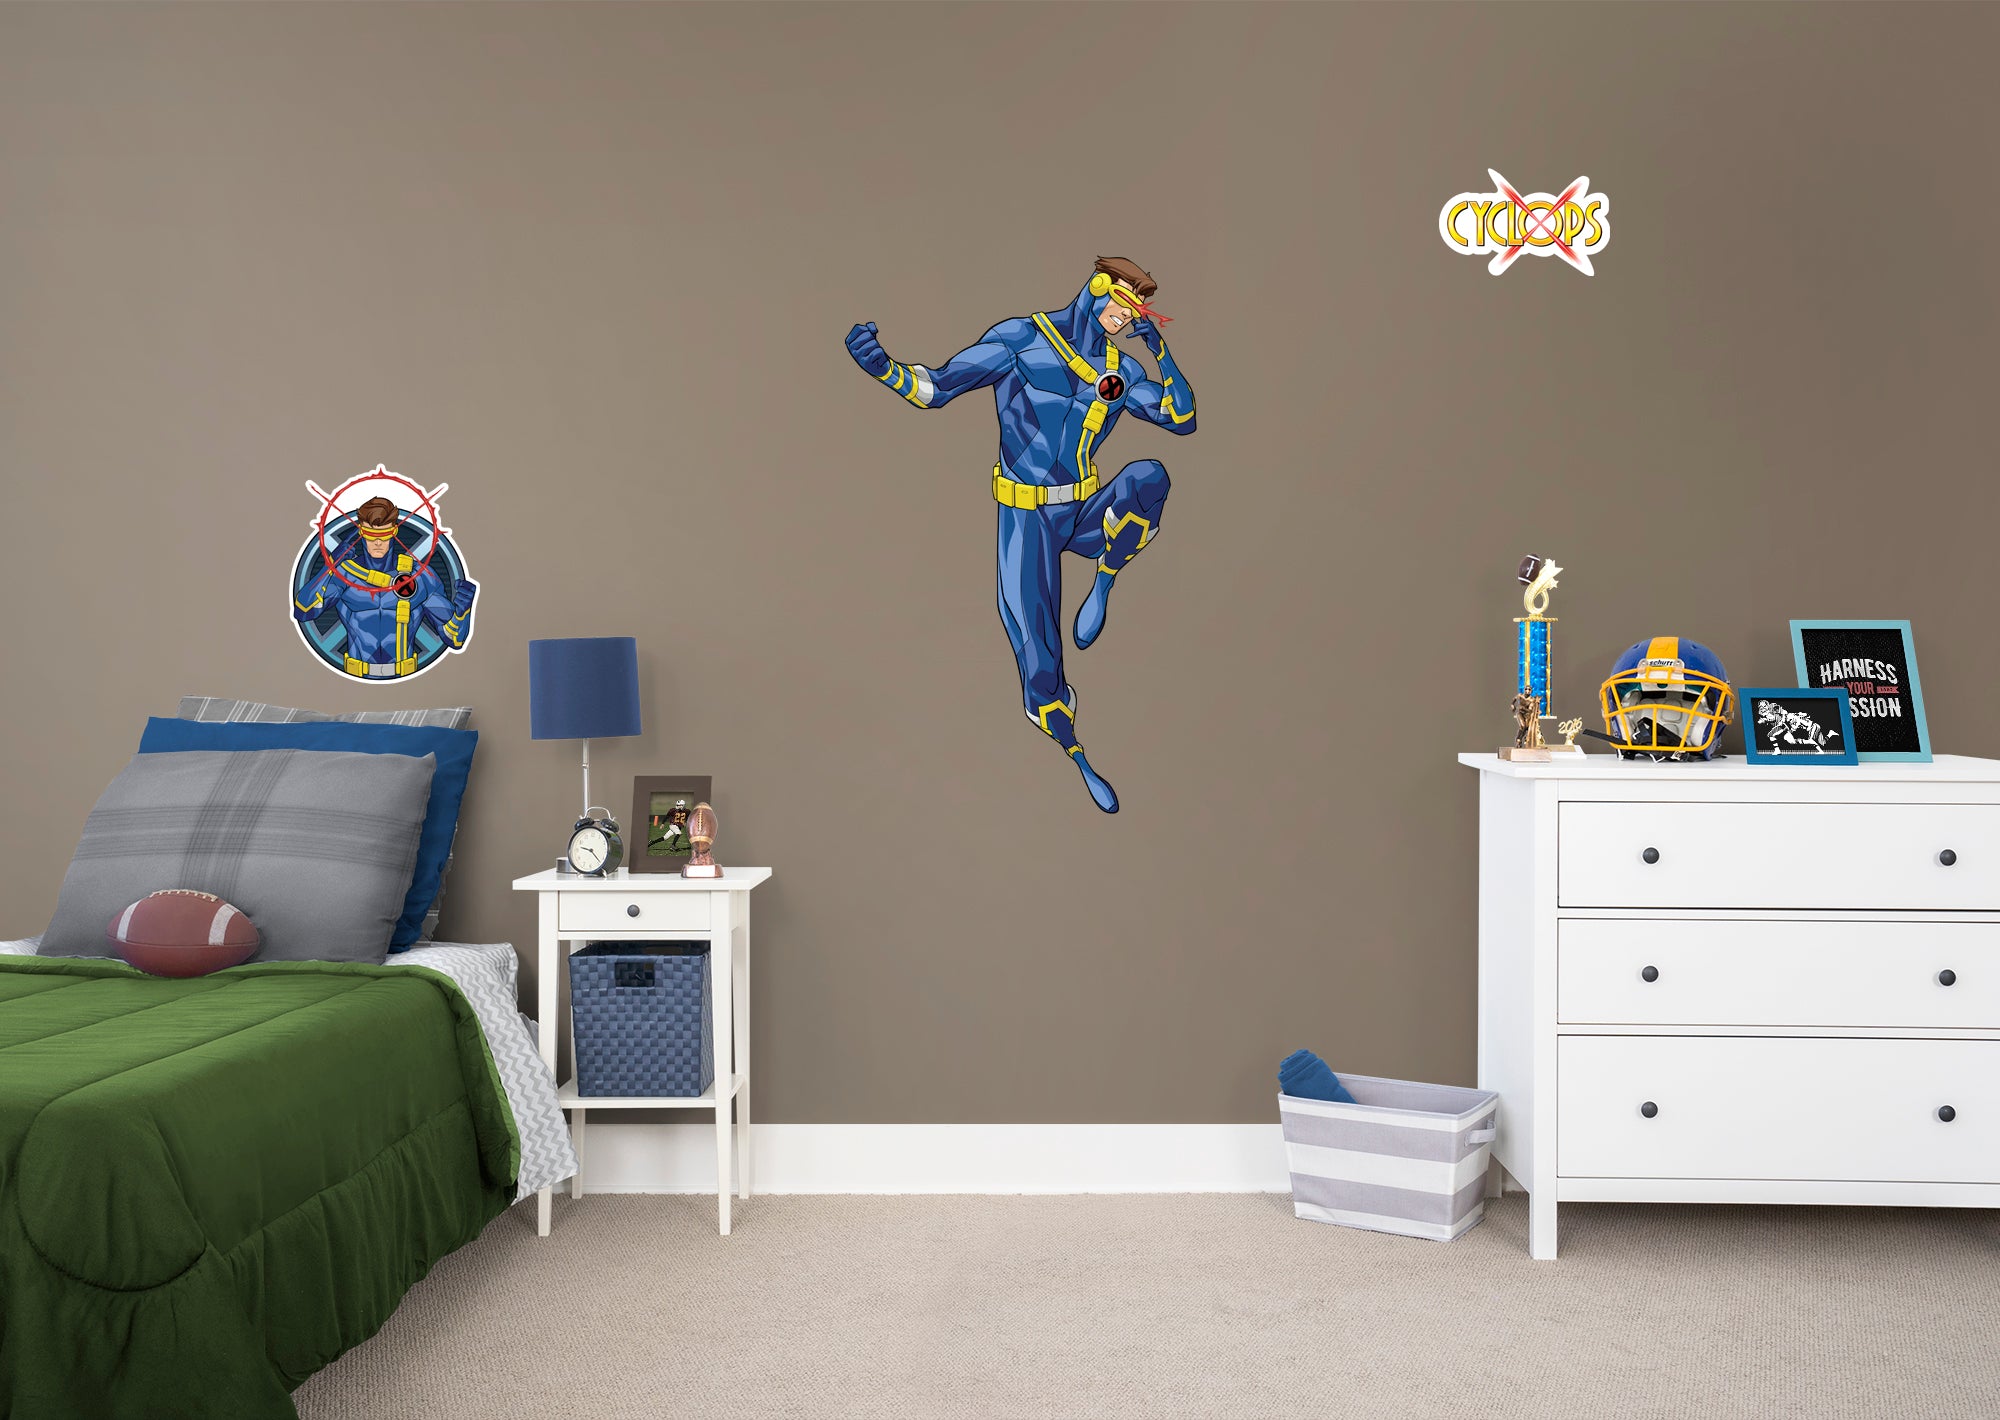 X-Men Cyclops RealBig - Officially Licensed Marvel Removable Wall Decal Giant Character + 2 Decals (32"W x 50"H) by Fathead | Vi